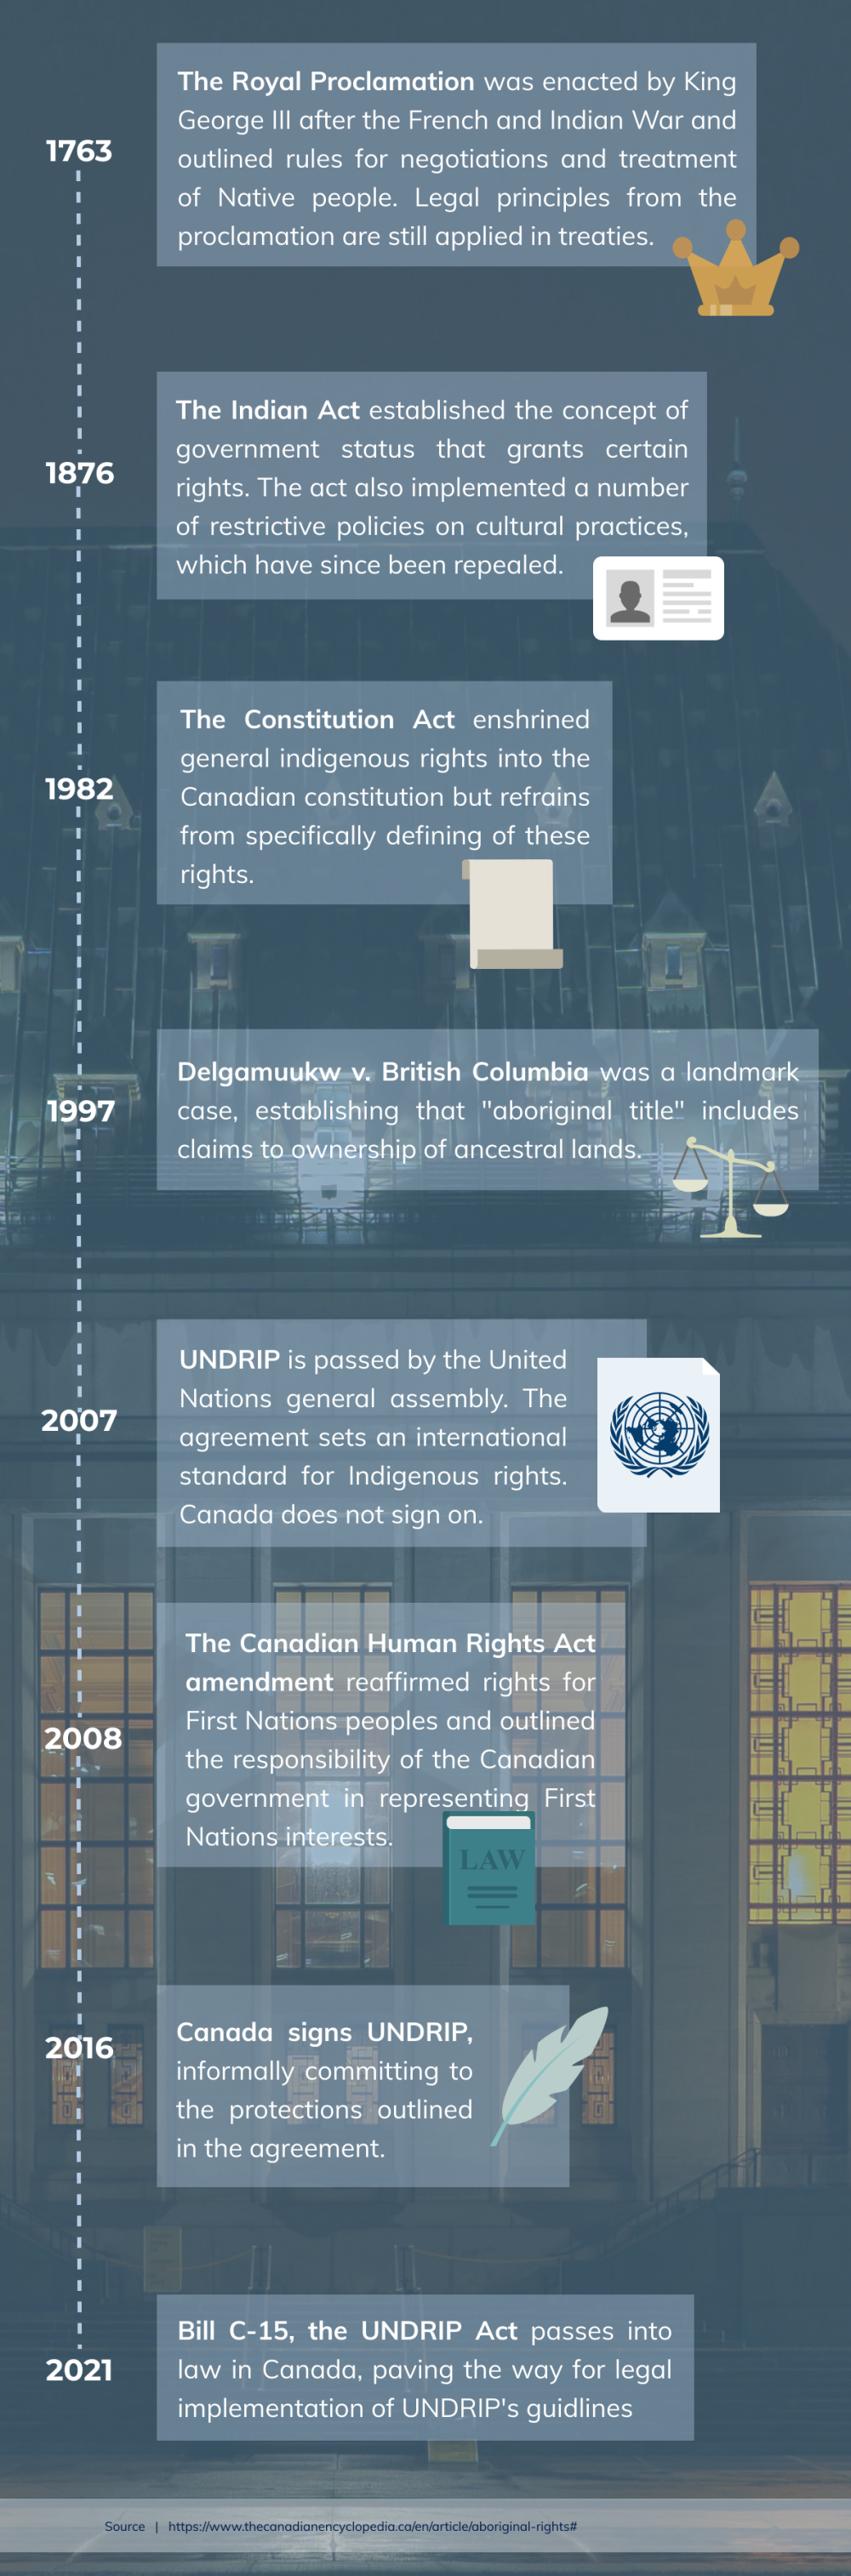 Timeline of Indigenous Rights in Canada